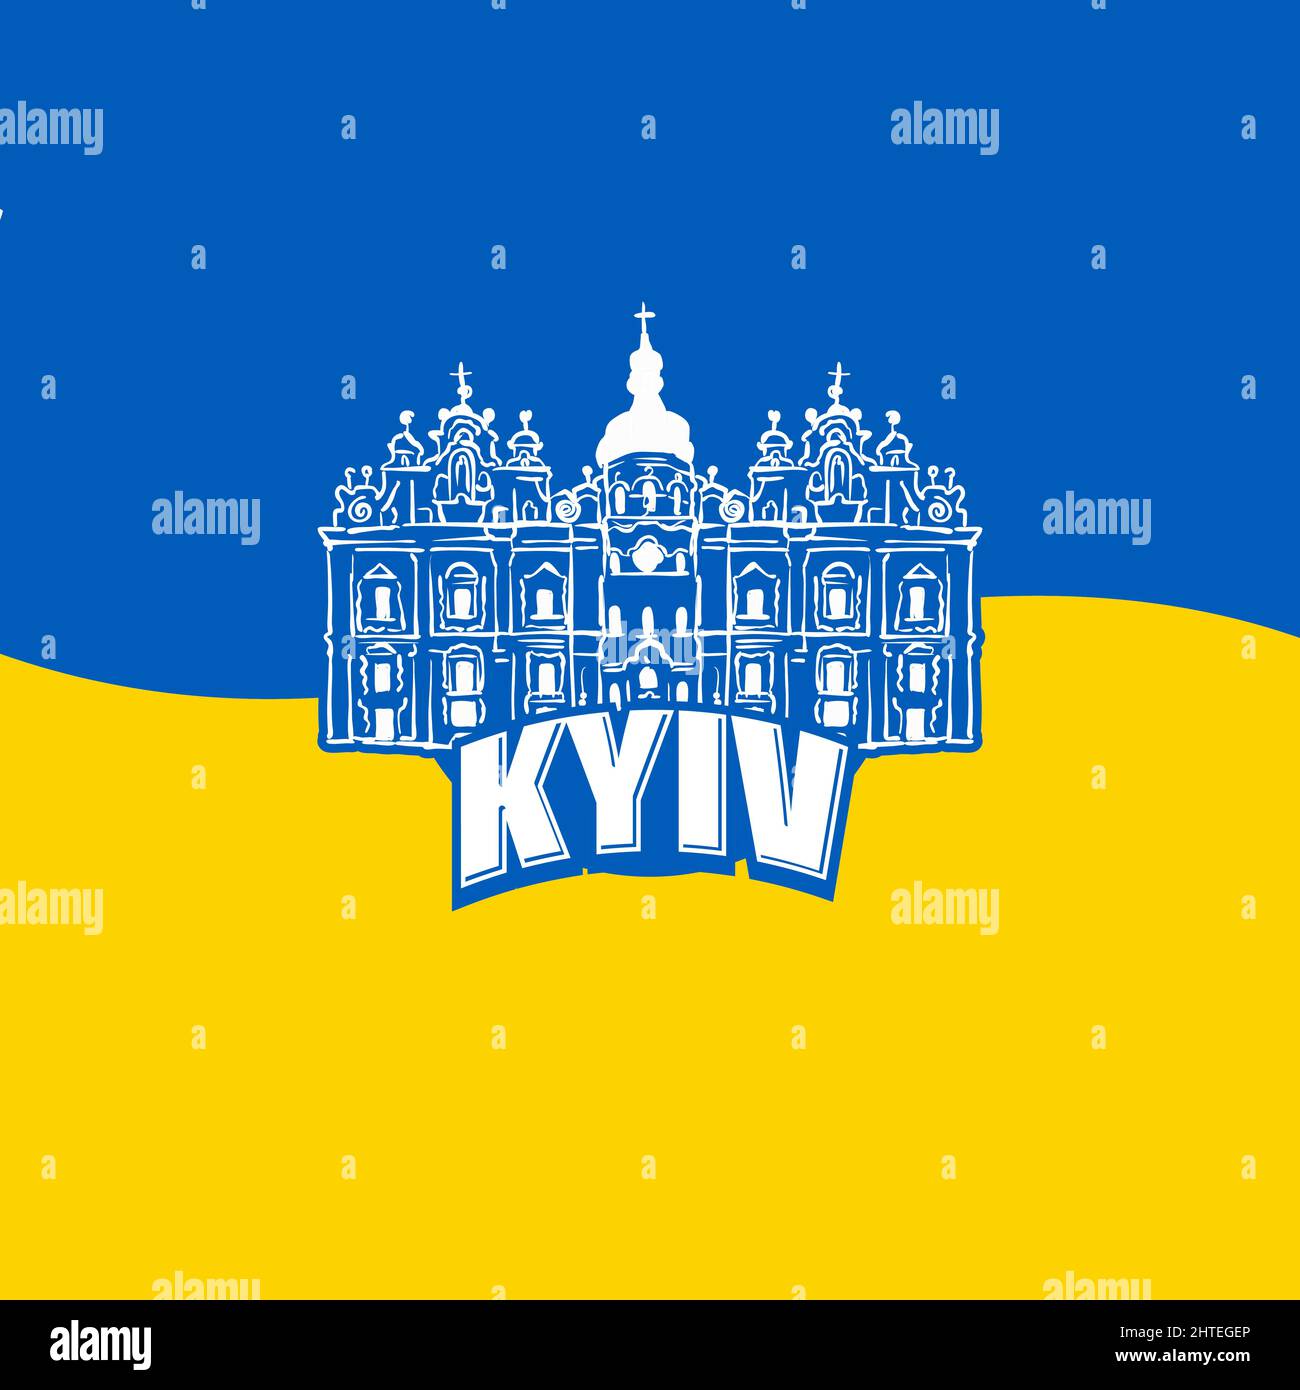 St. Michaels Golden Domed with Kyiv Lettering icon on flag. ector icon for web and print concepts in ukrainian colors. Freedom symbol, icon, button.-S Stock Vector